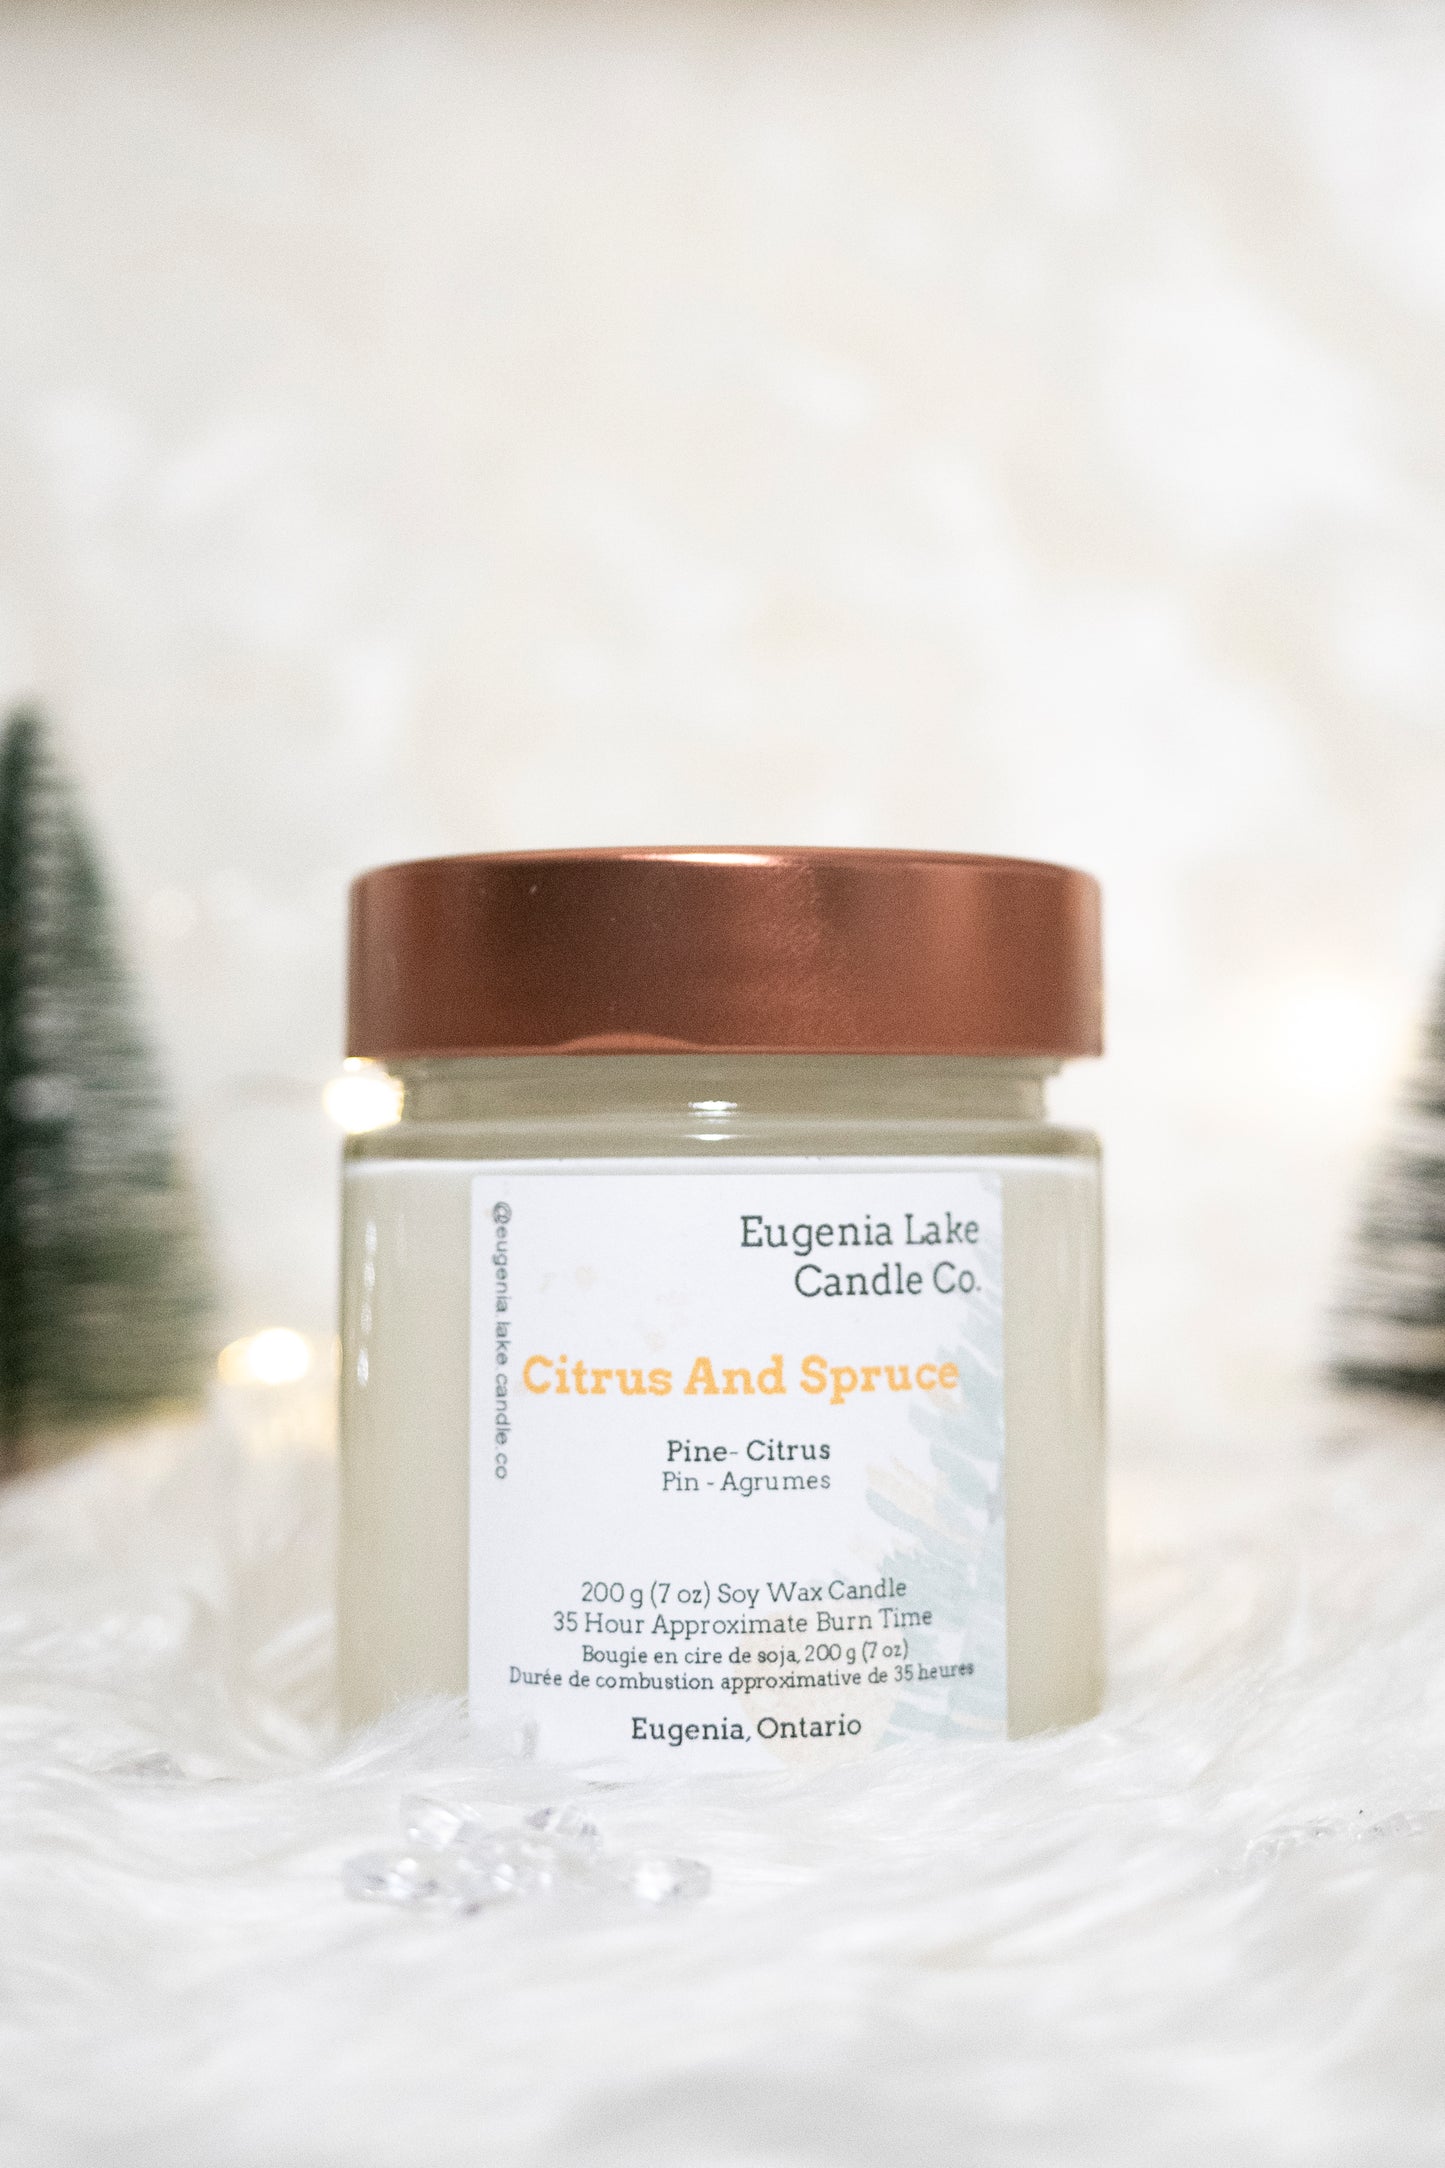 Citrus And Spruce Soy Wax Candle